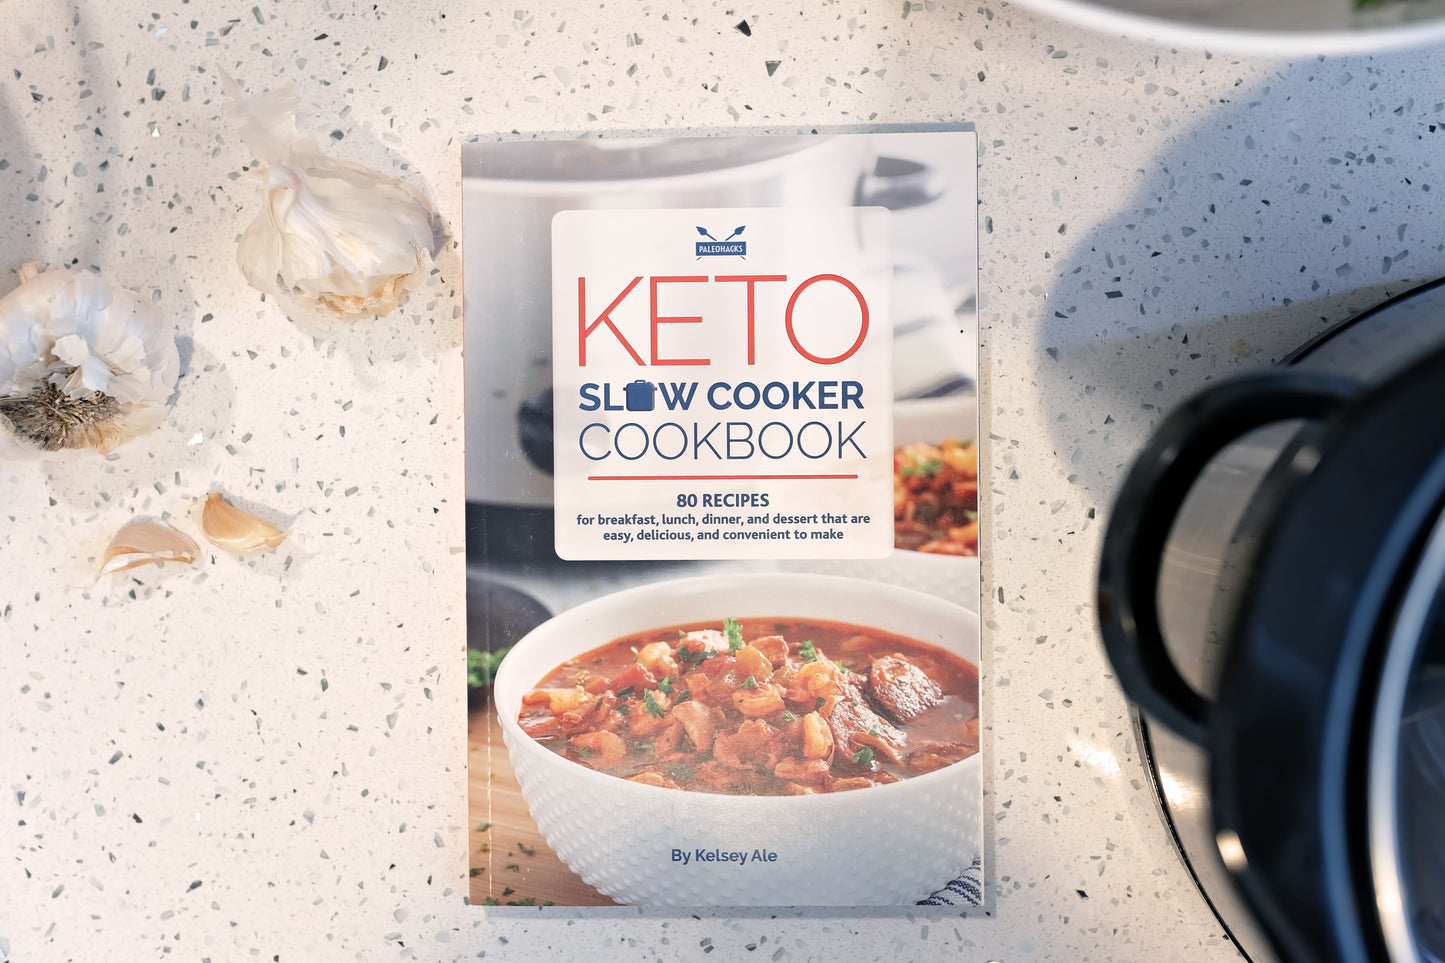 Keto slow cookbook placed on a marble surface. Garlic and cookware can also be seen in the scene